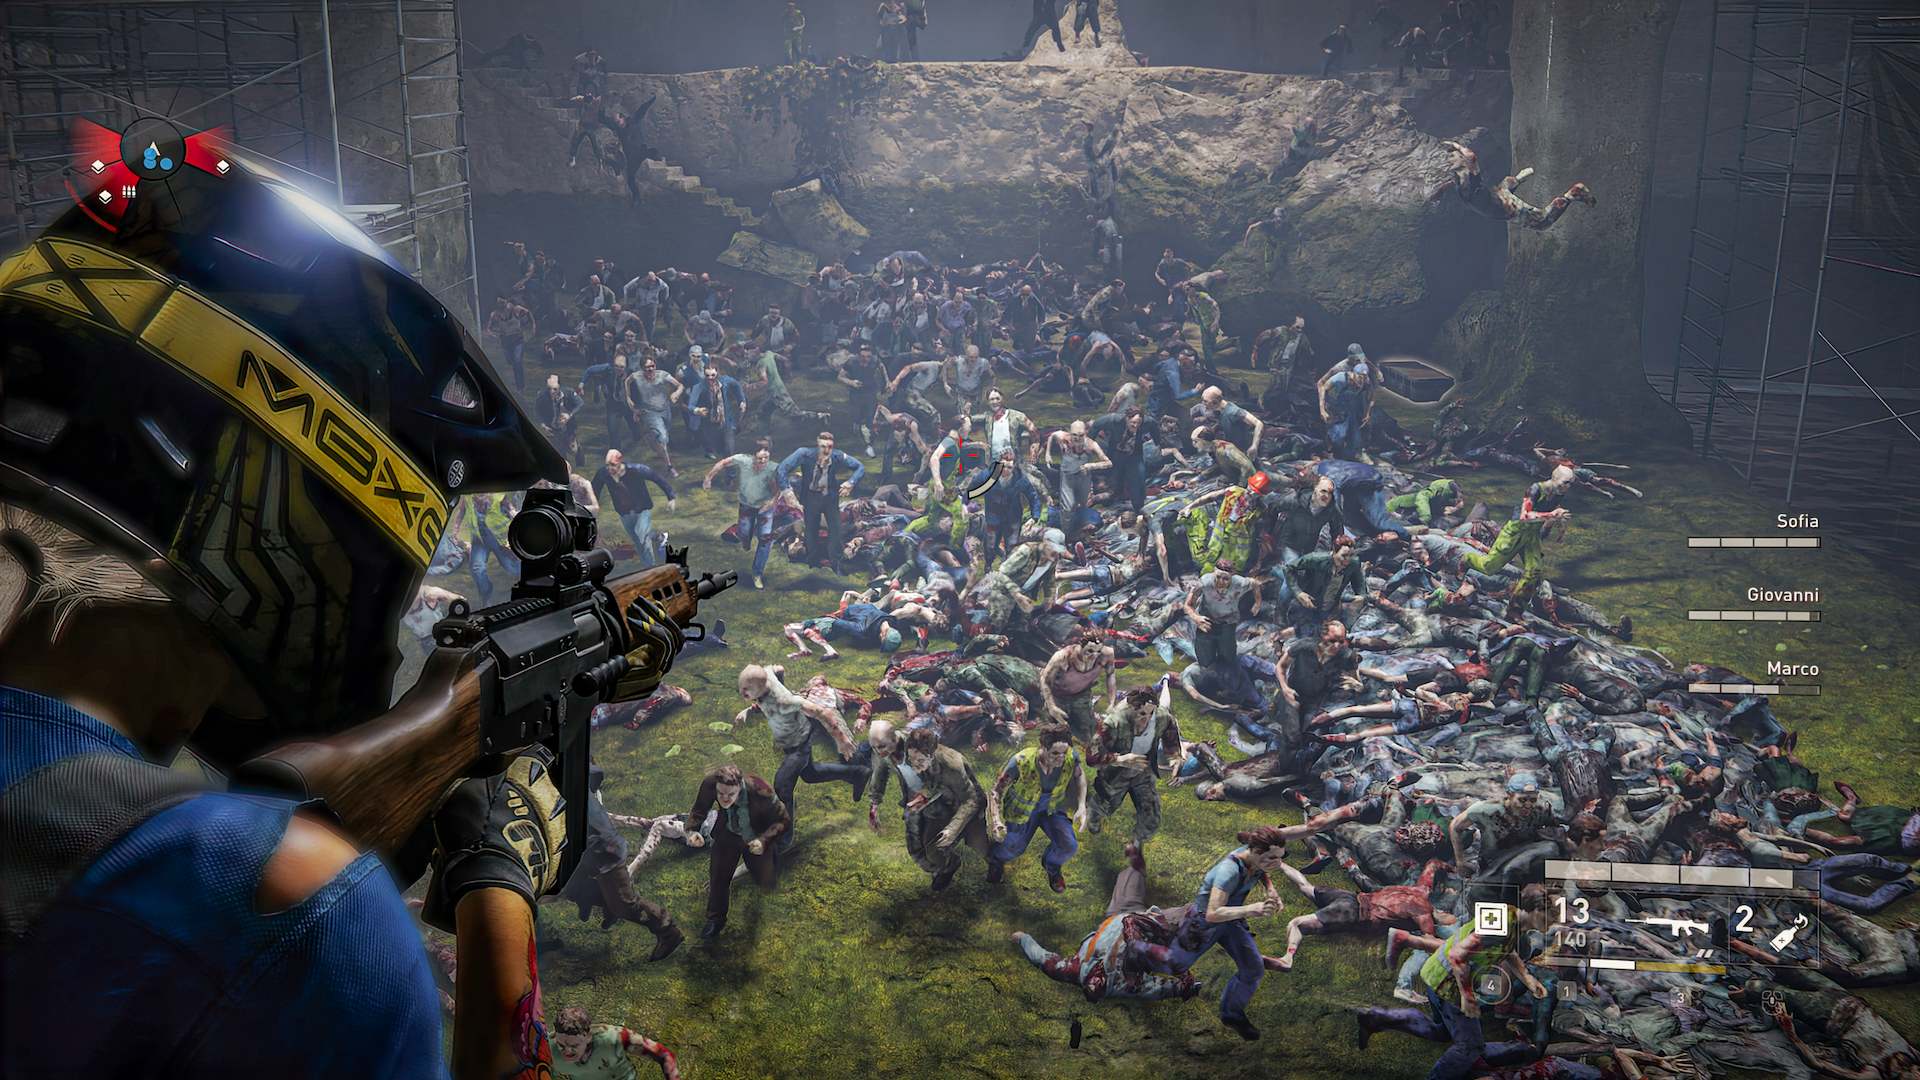 Official World War Z video game in the works